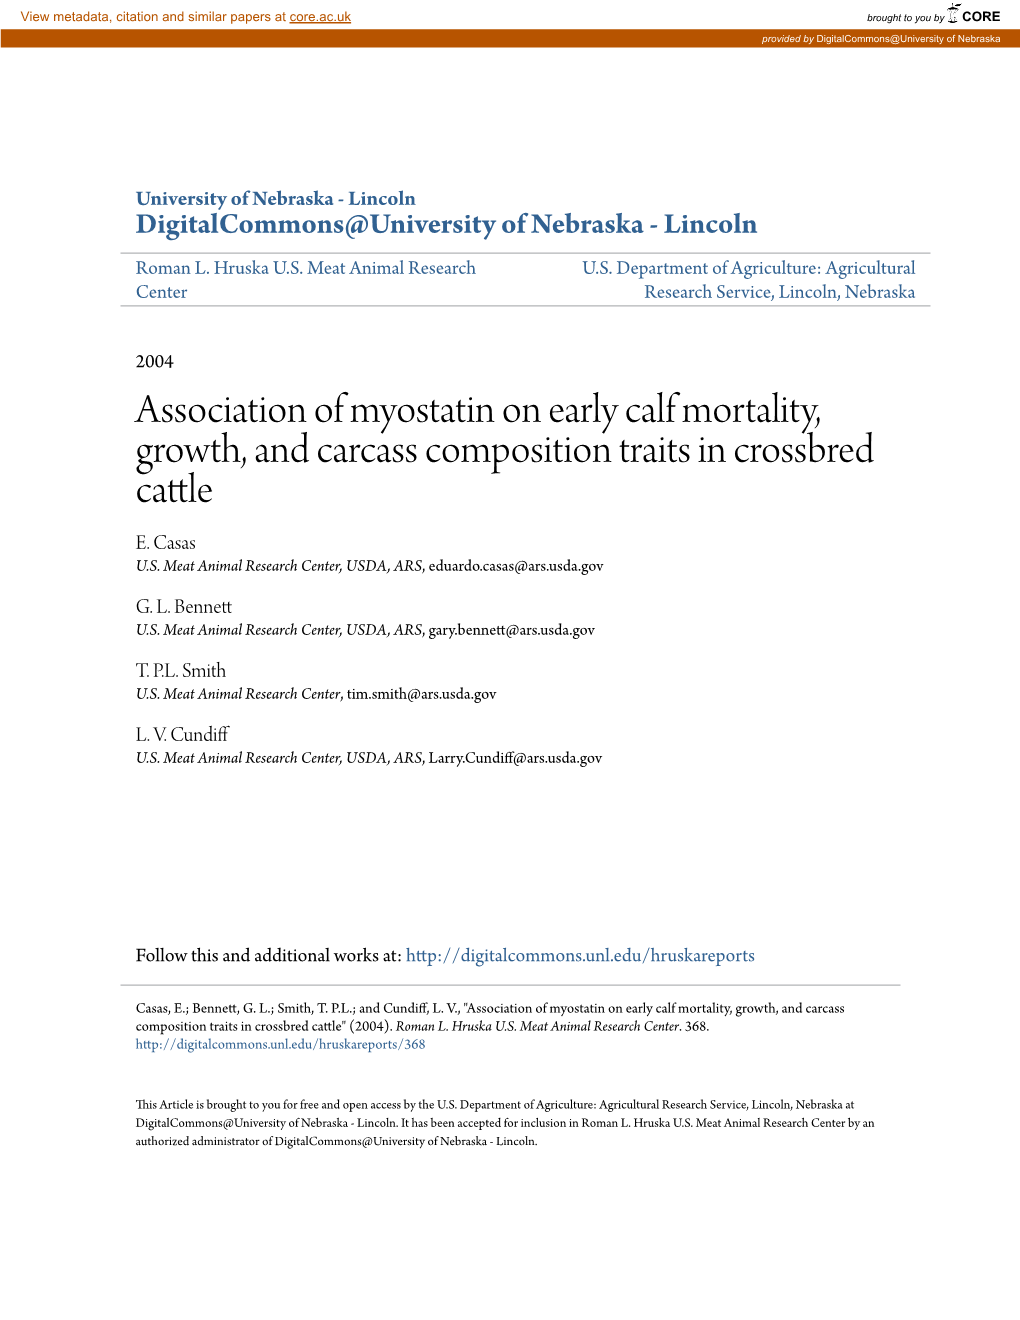 Association of Myostatin on Early Calf Mortality, Growth, and Carcass Composition Traits in Crossbred Cattle E